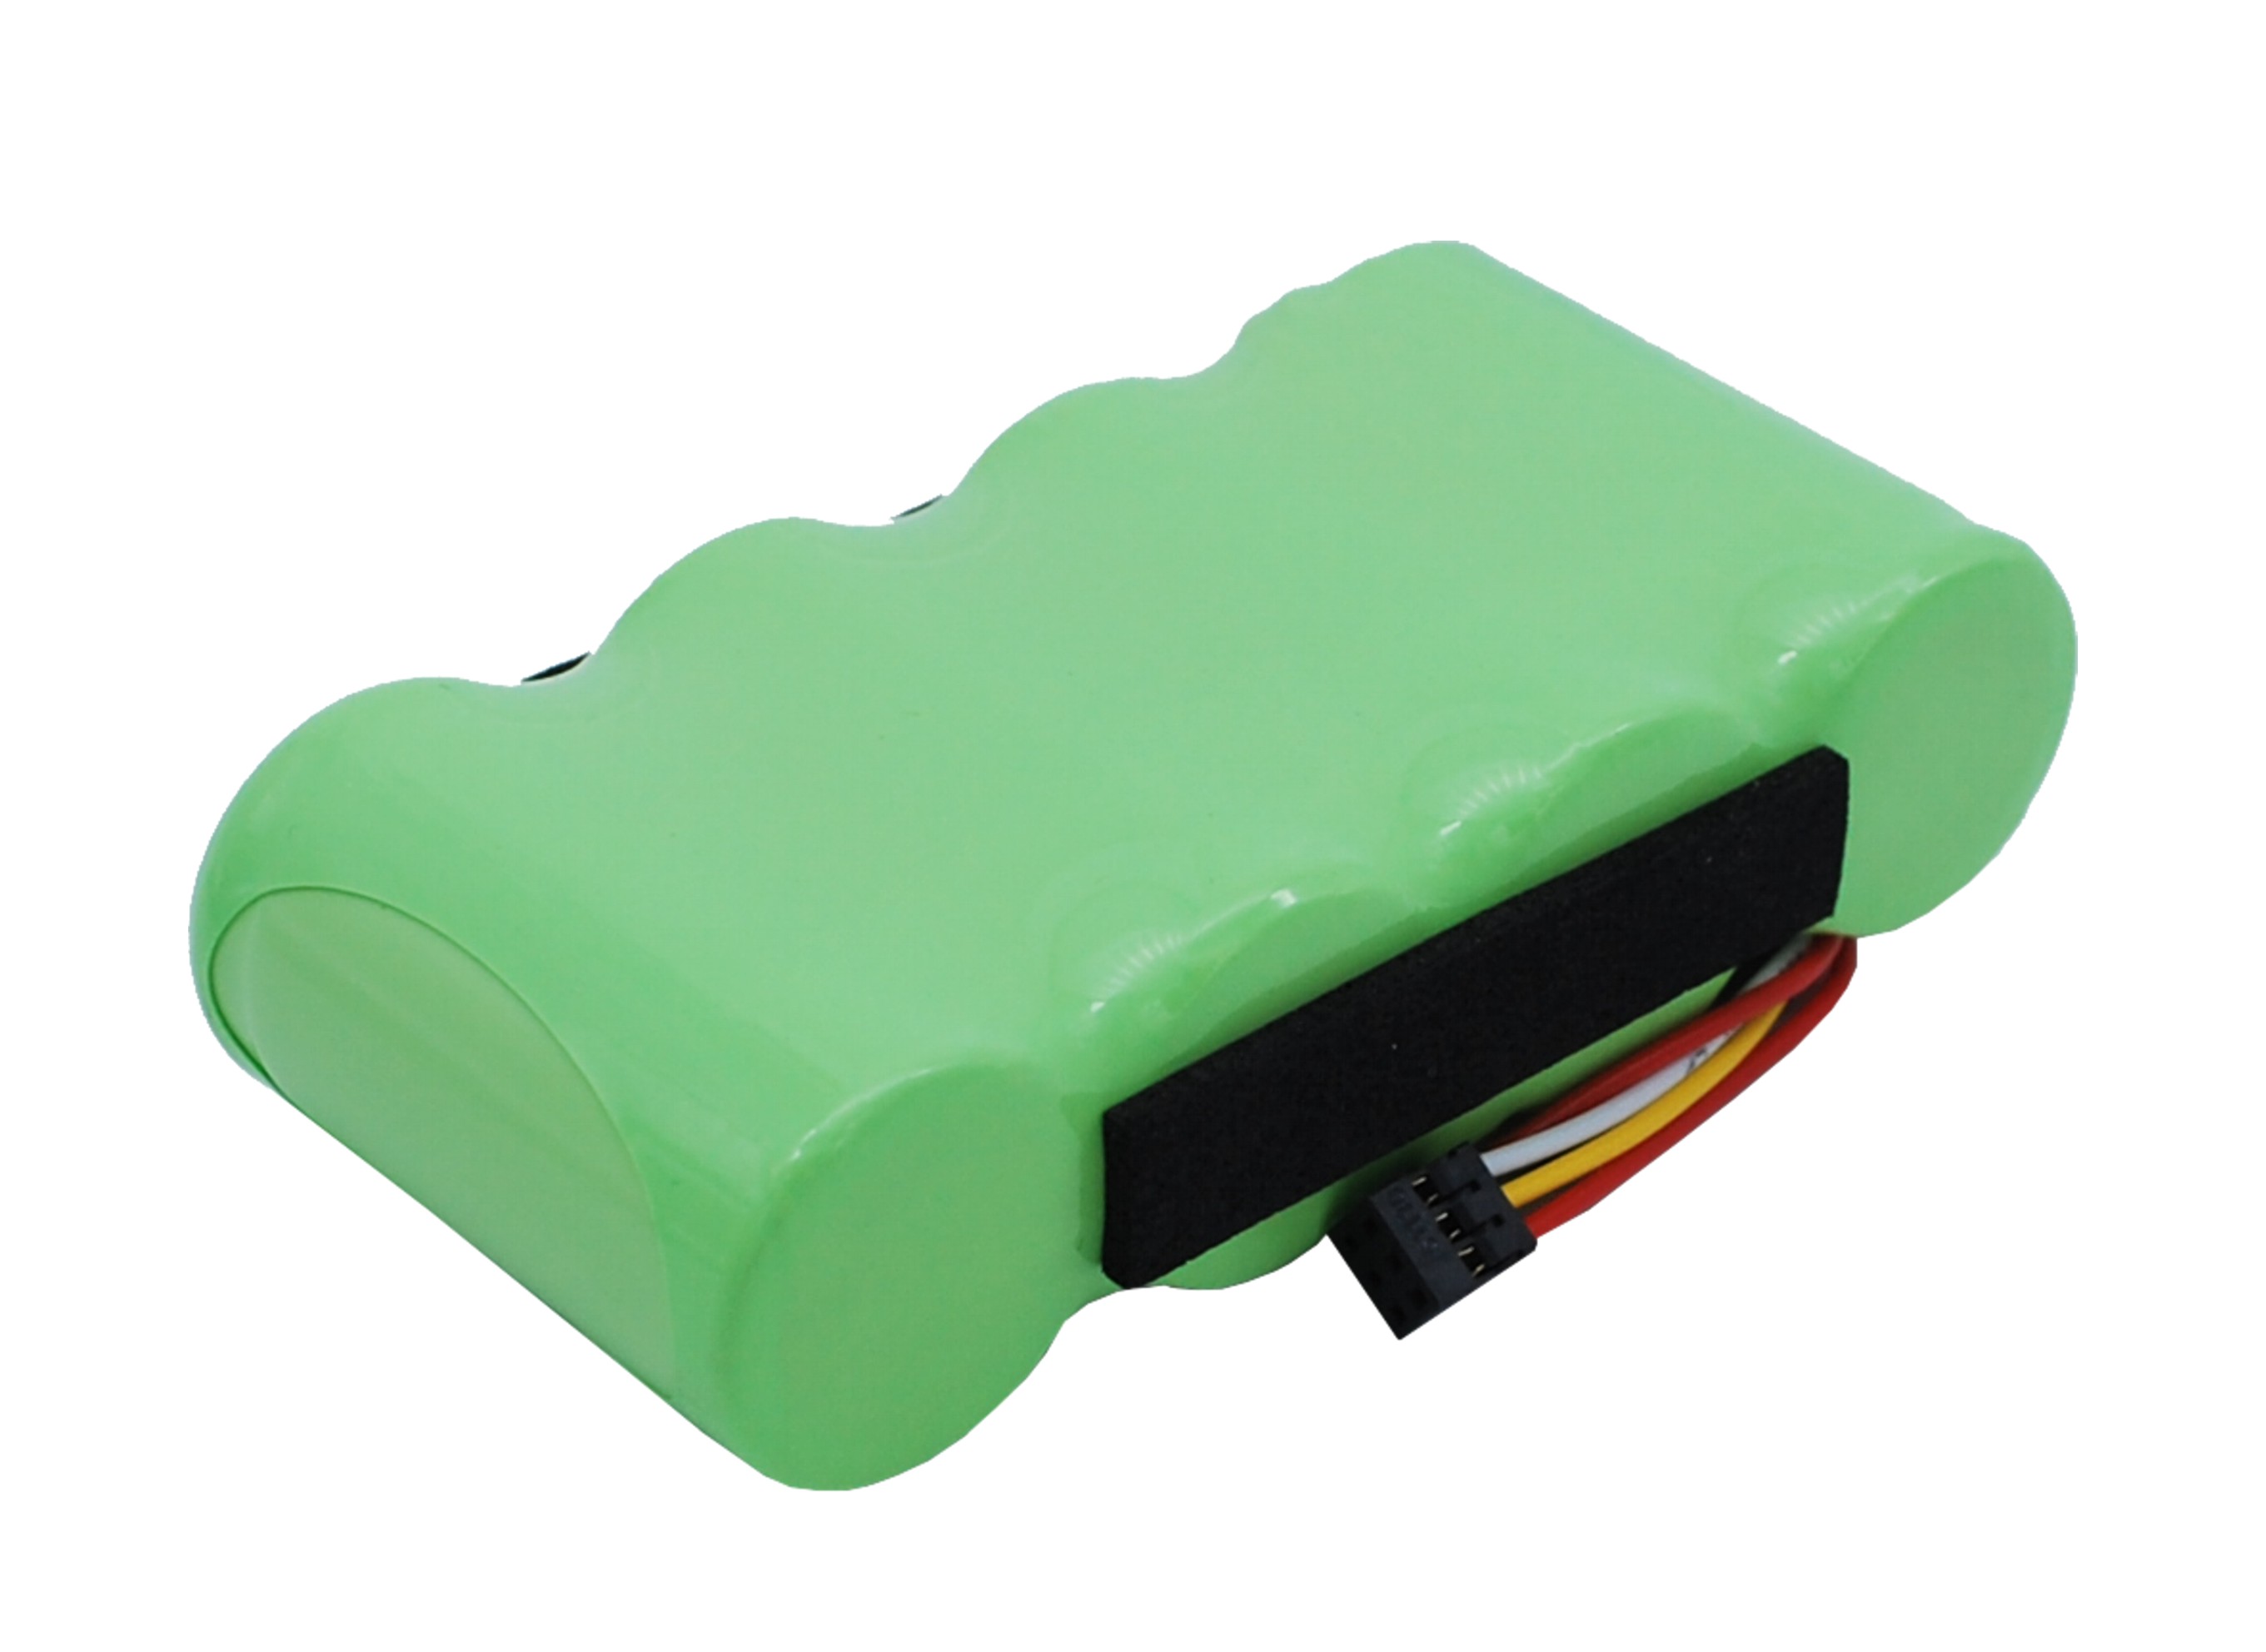 Replacement Battery for Fluke 120, 123, 124 Series ScopeMeters and Fluke 43 & 43B Power Quality Analyzers. 3000 mAh